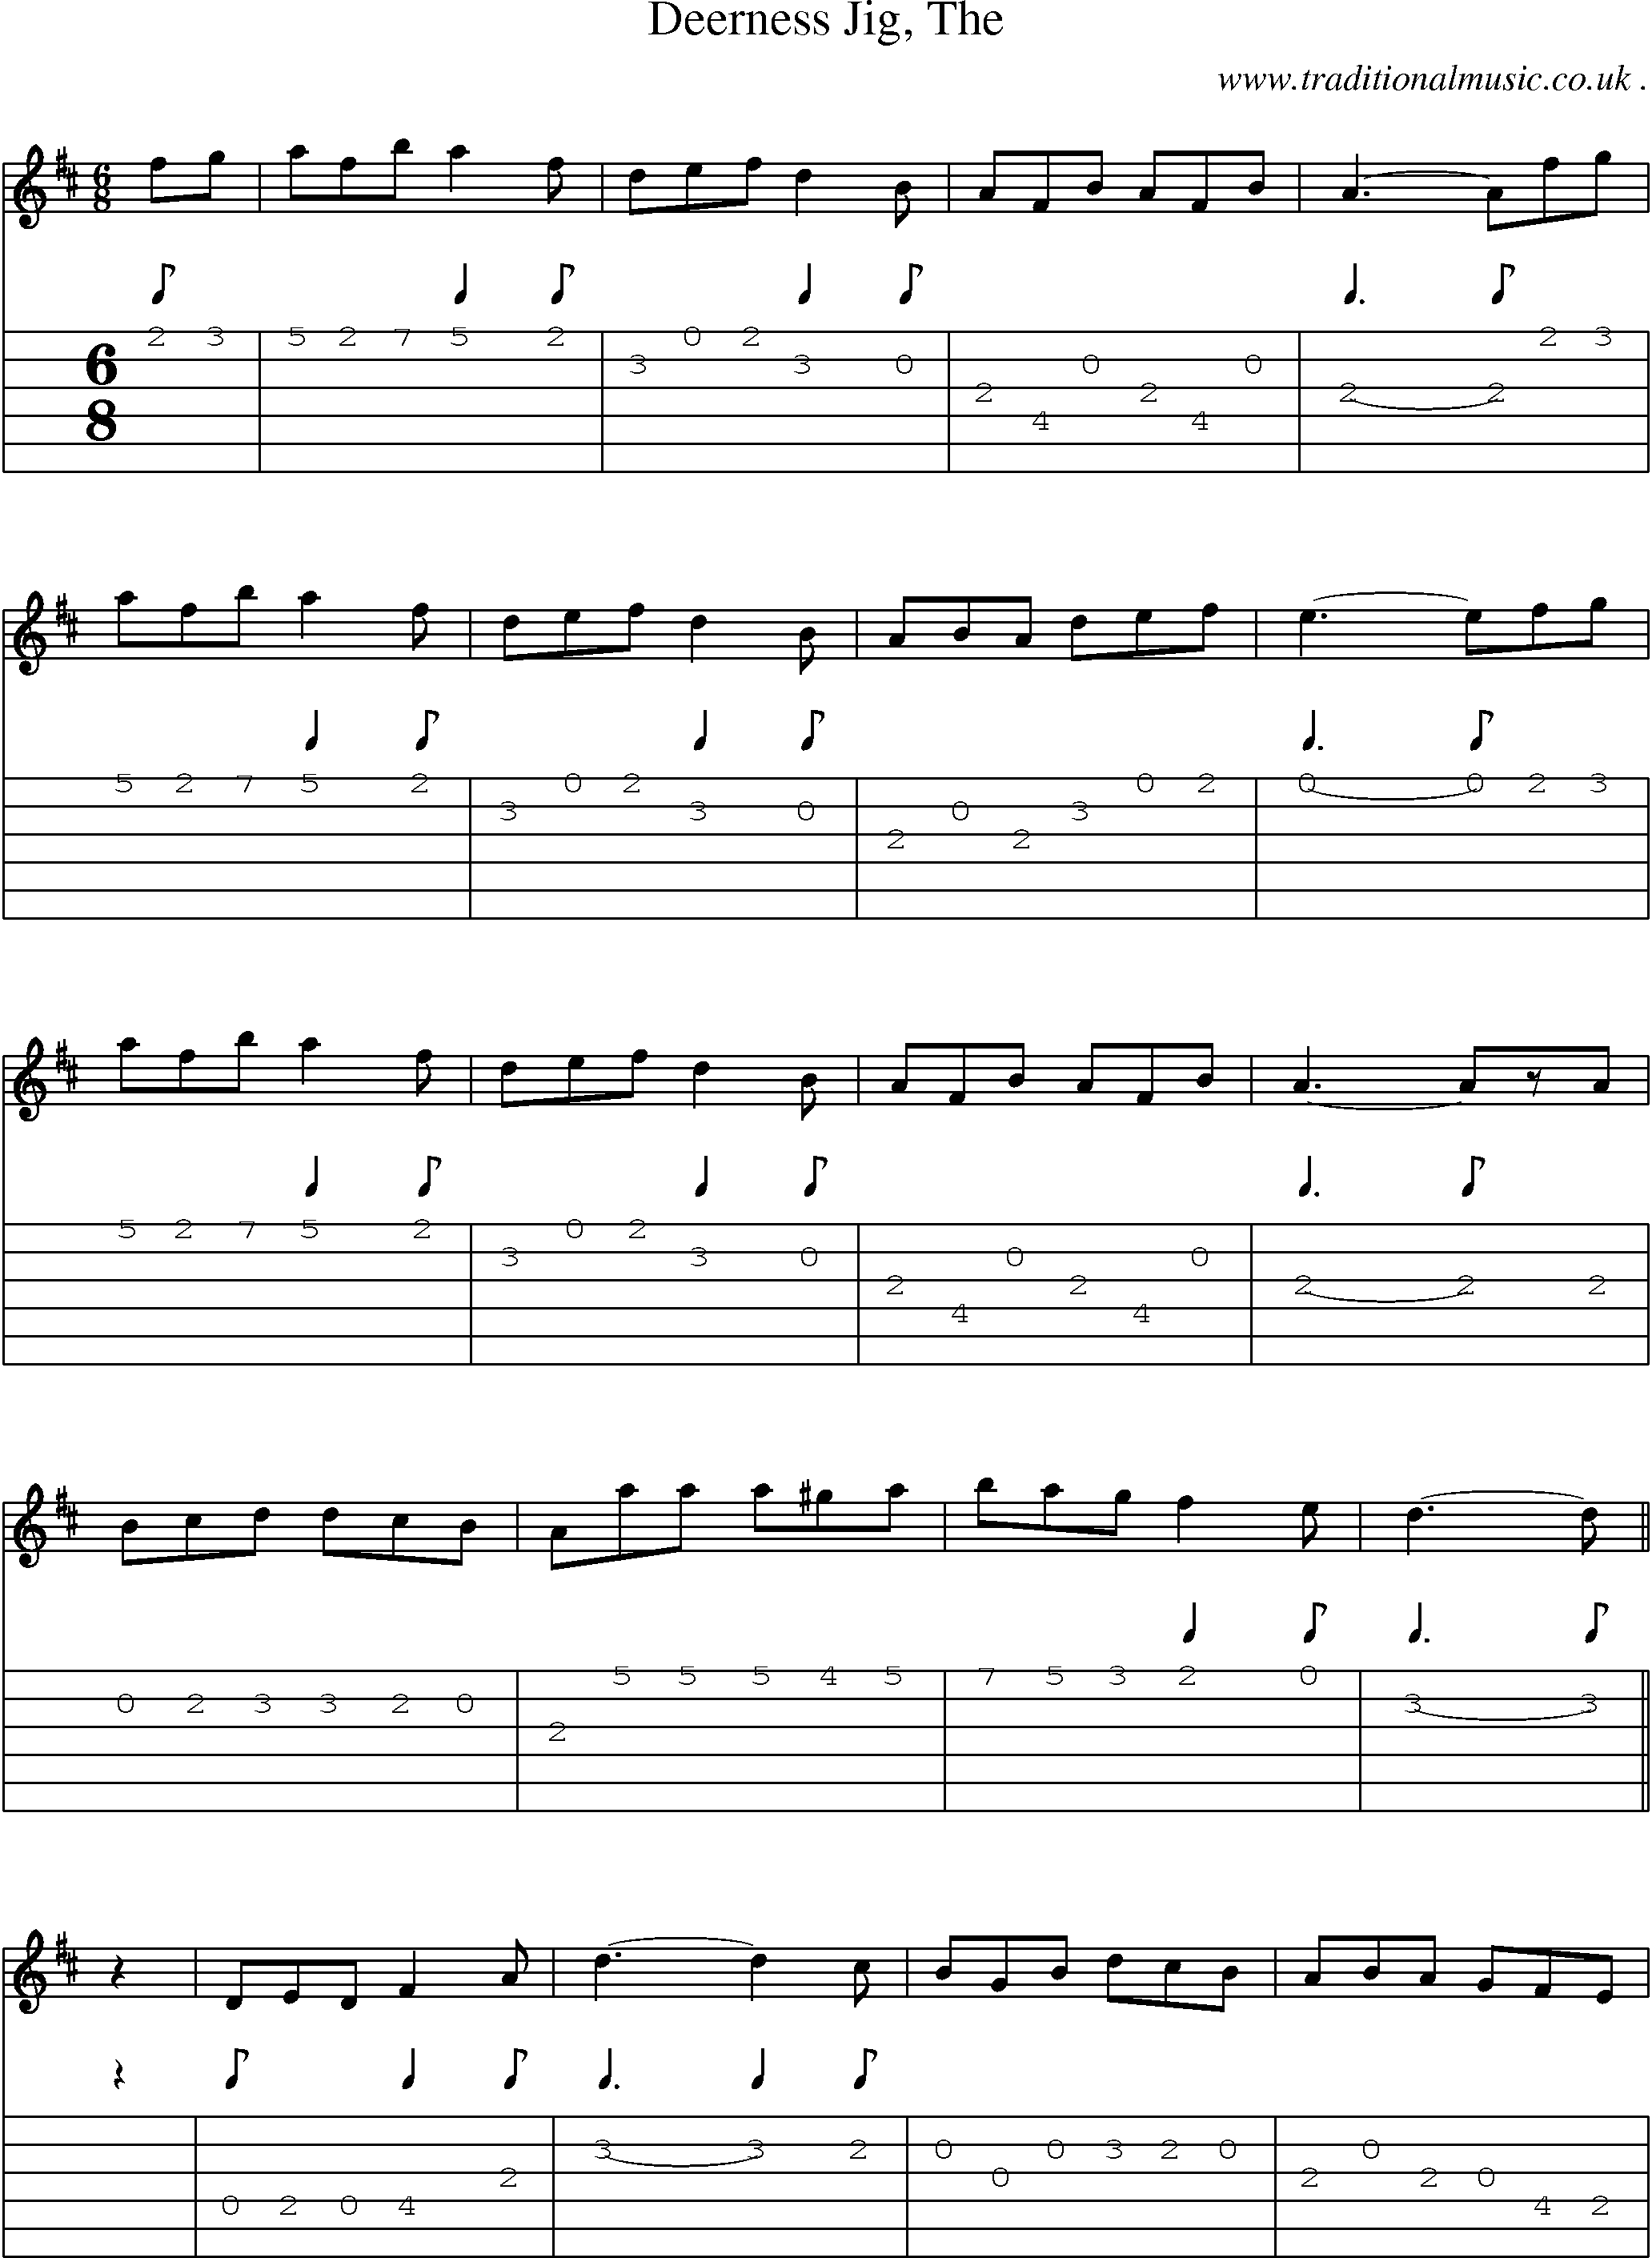 Sheet-music  score, Chords and Guitar Tabs for Deerness Jig The